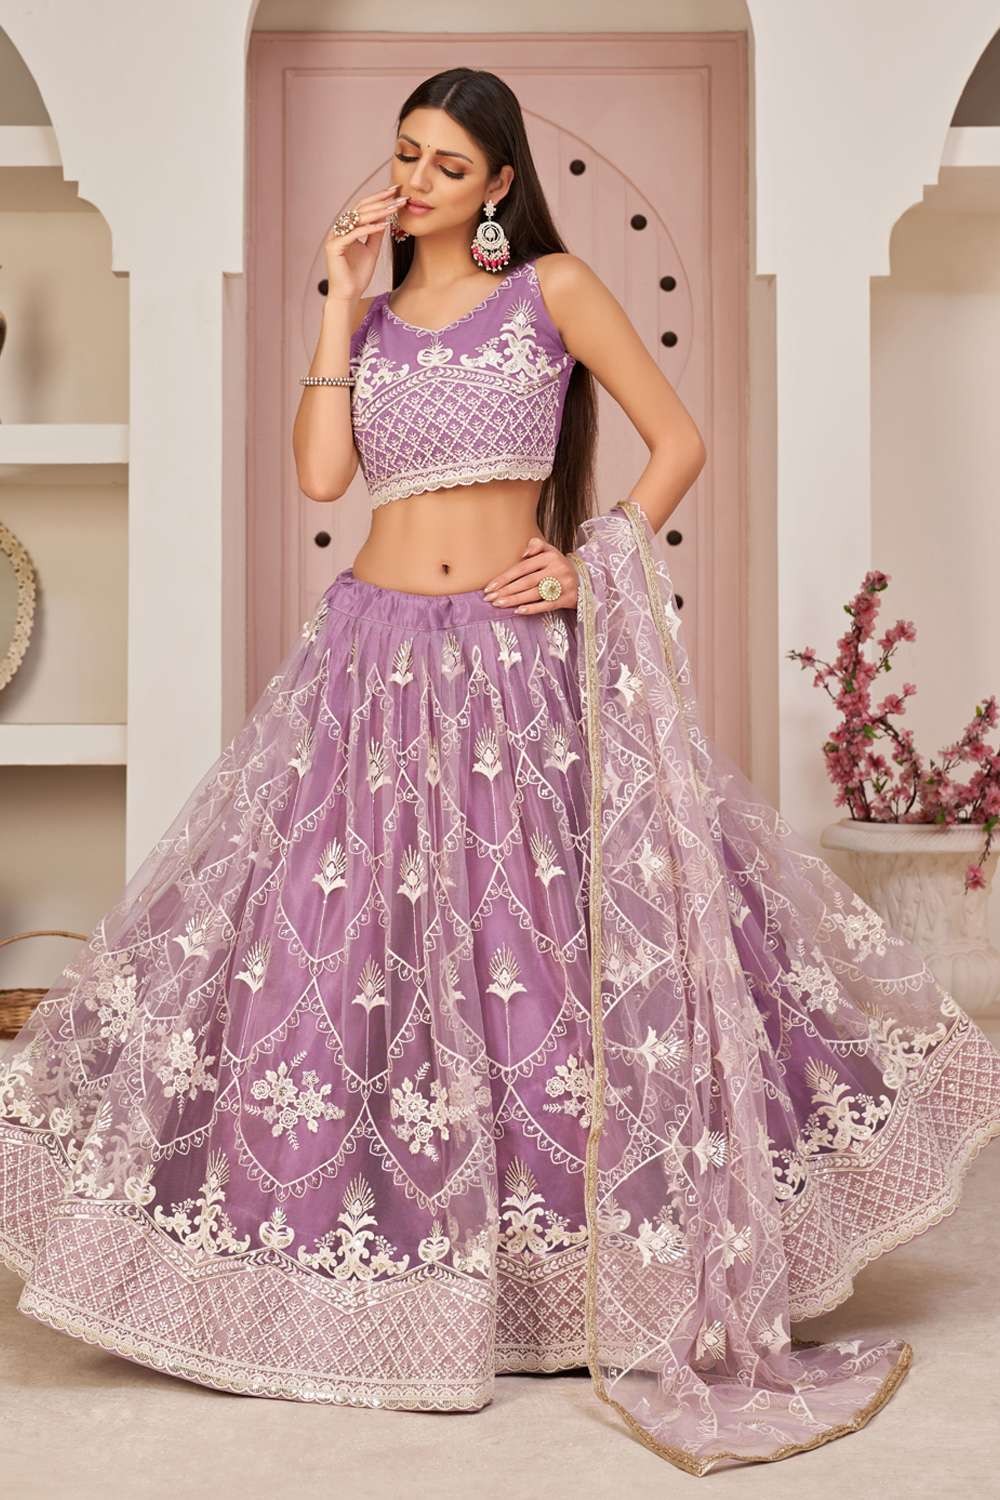 DIWALI SPECIAL DESIGNER LEHENGA CHOLI DUPPTTA . at Rs.799/Piece in surat  offer by Khodal Fashion